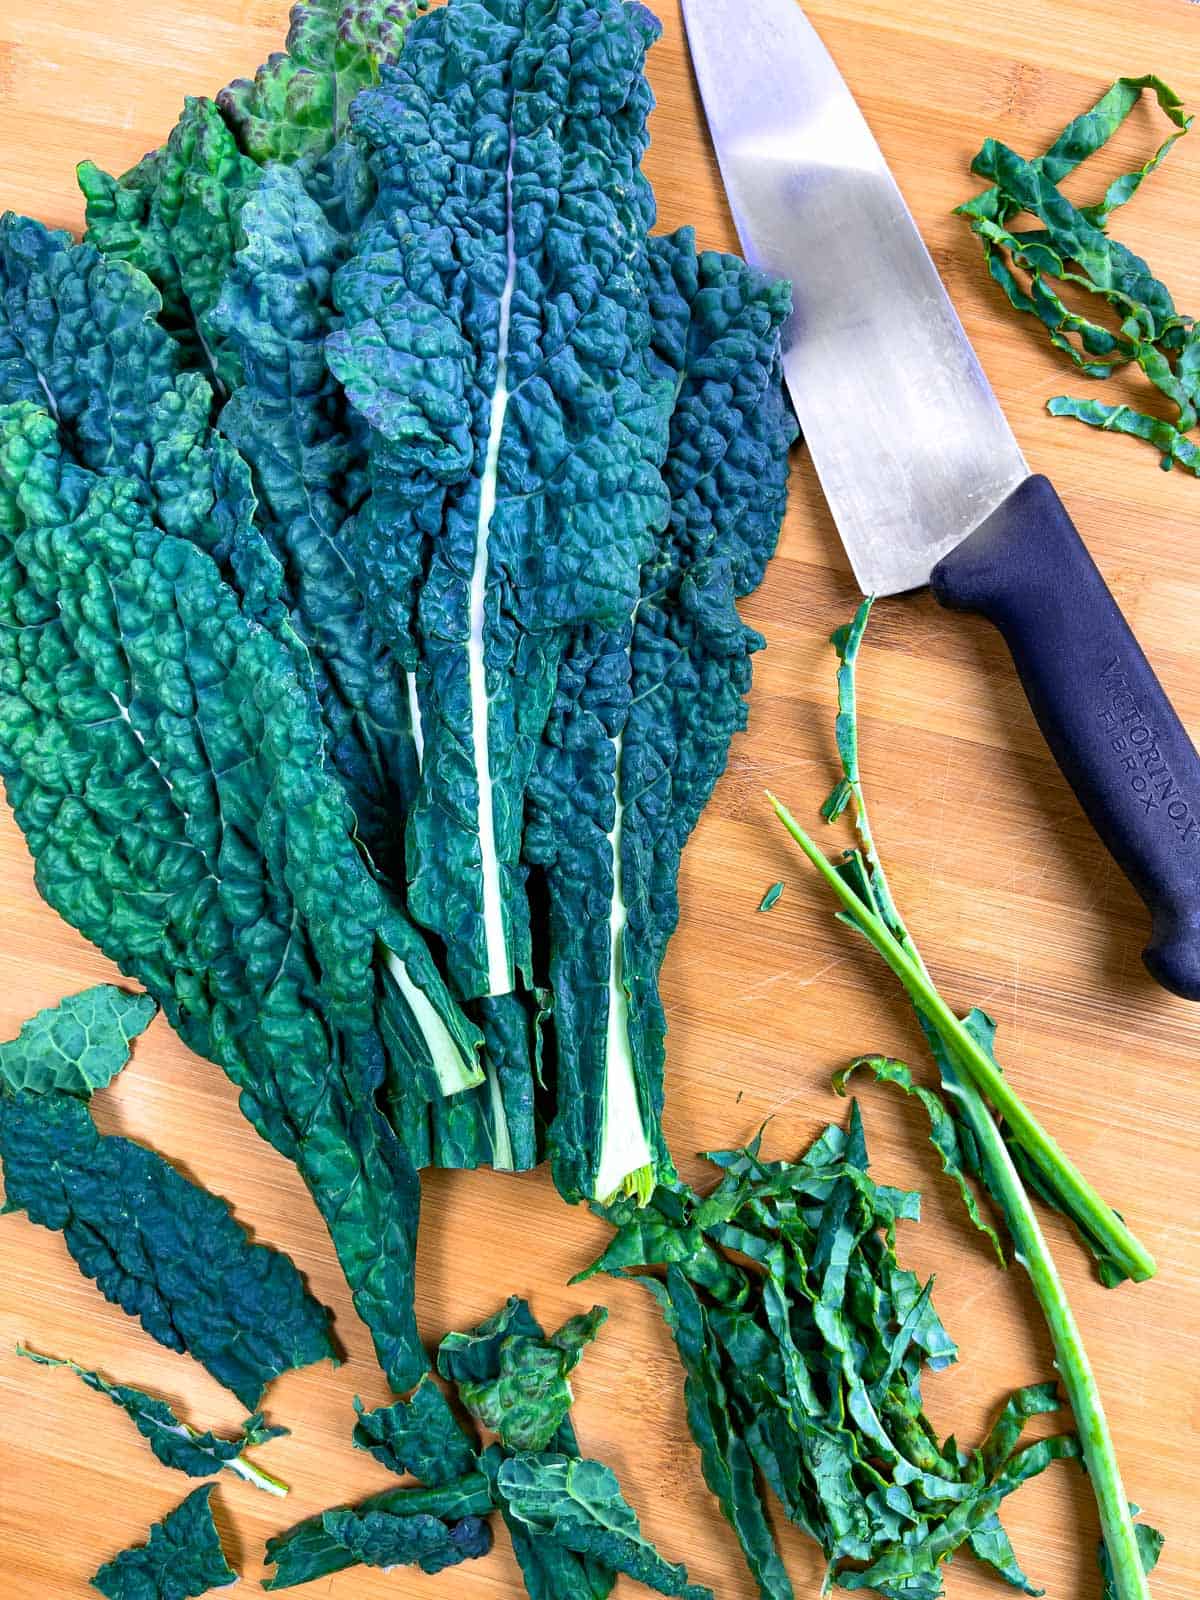 Whole leaves of kale on a cutting board with a knife, showing some destemmed and chopped.